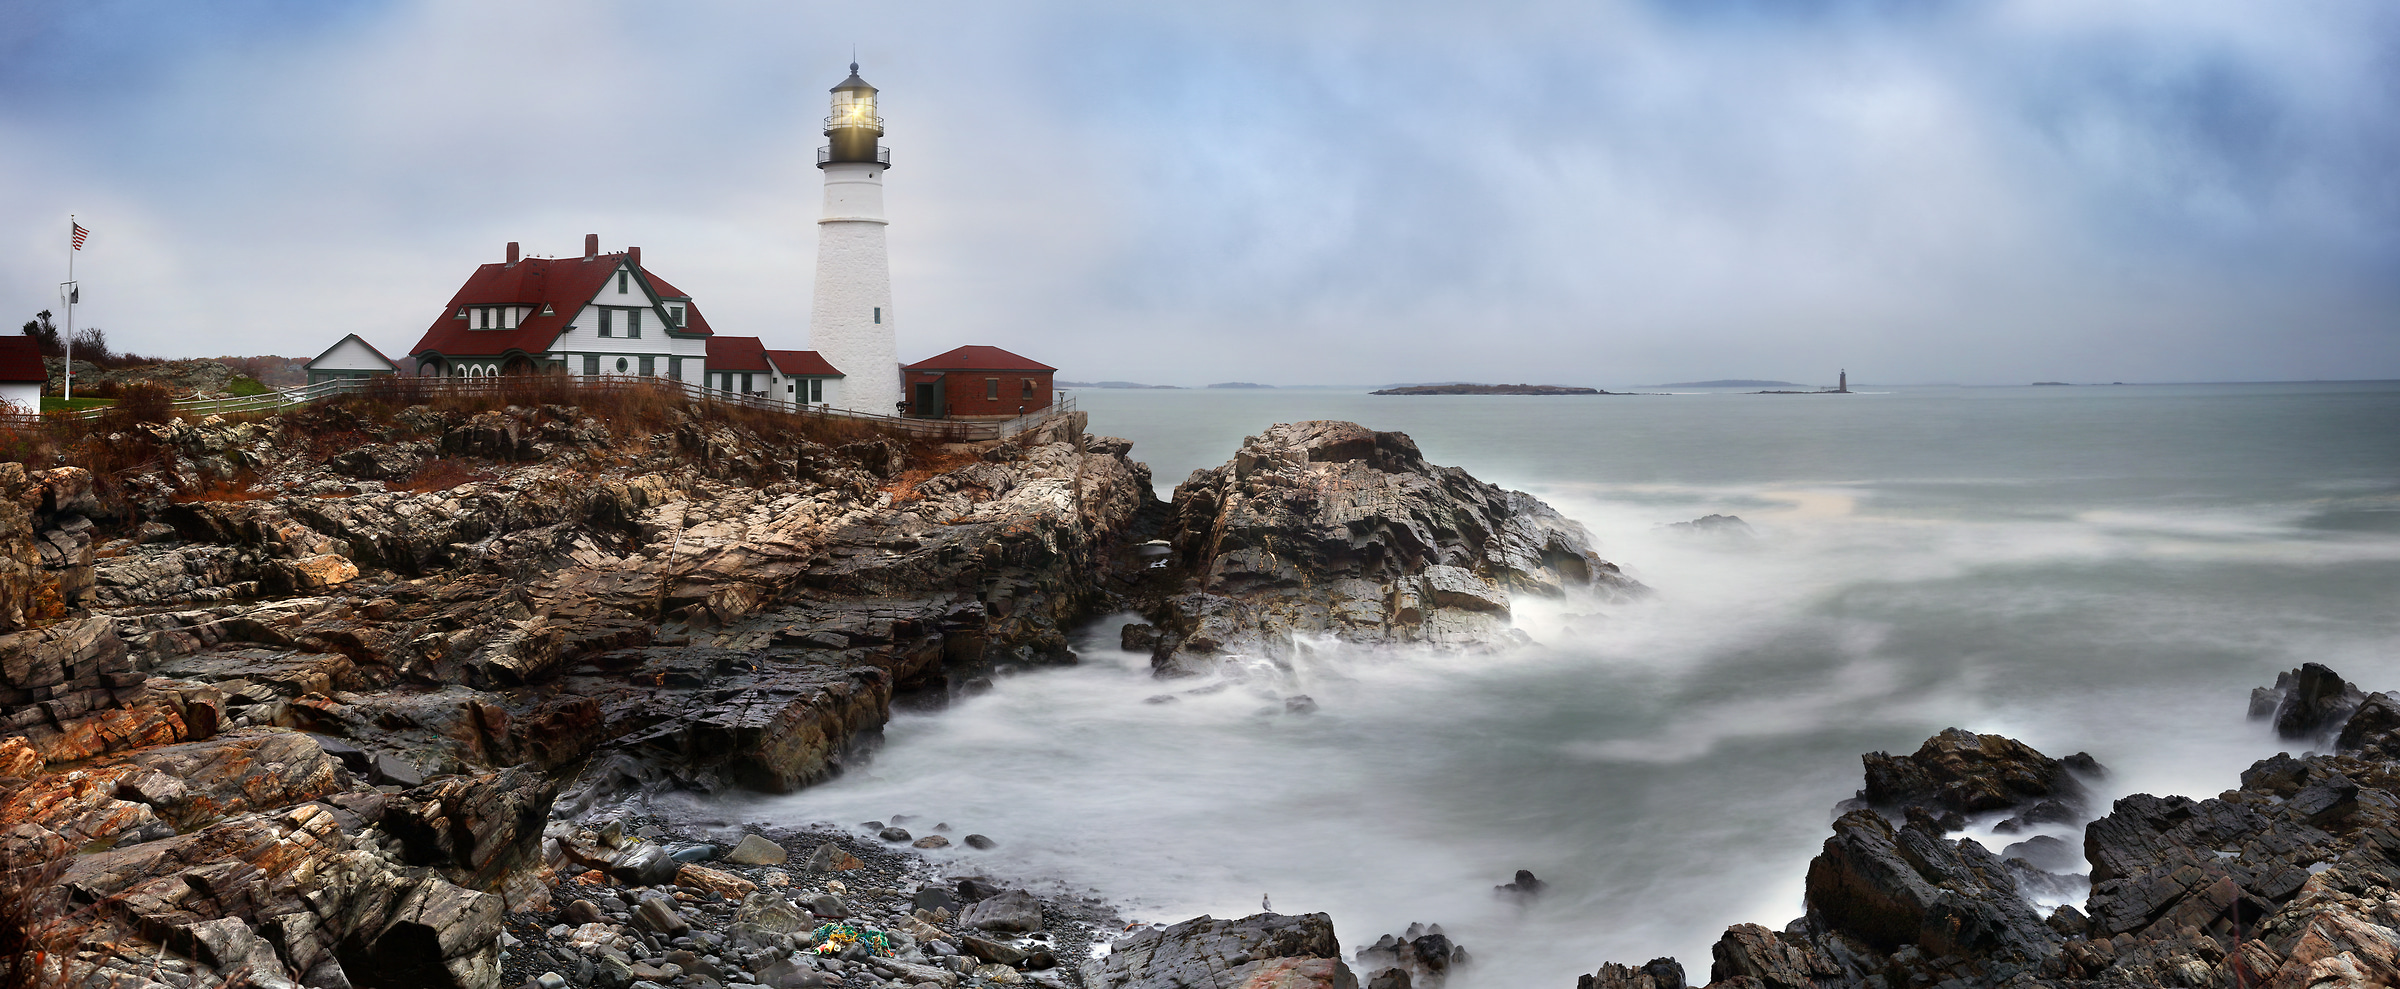 521 megapixels! A very high resolution, large-format VAST photo print of a lighthouse with the ocean and rocks; photograph created by Phil Crawshay in Portland Head Lighthouse, Portland, Maine.